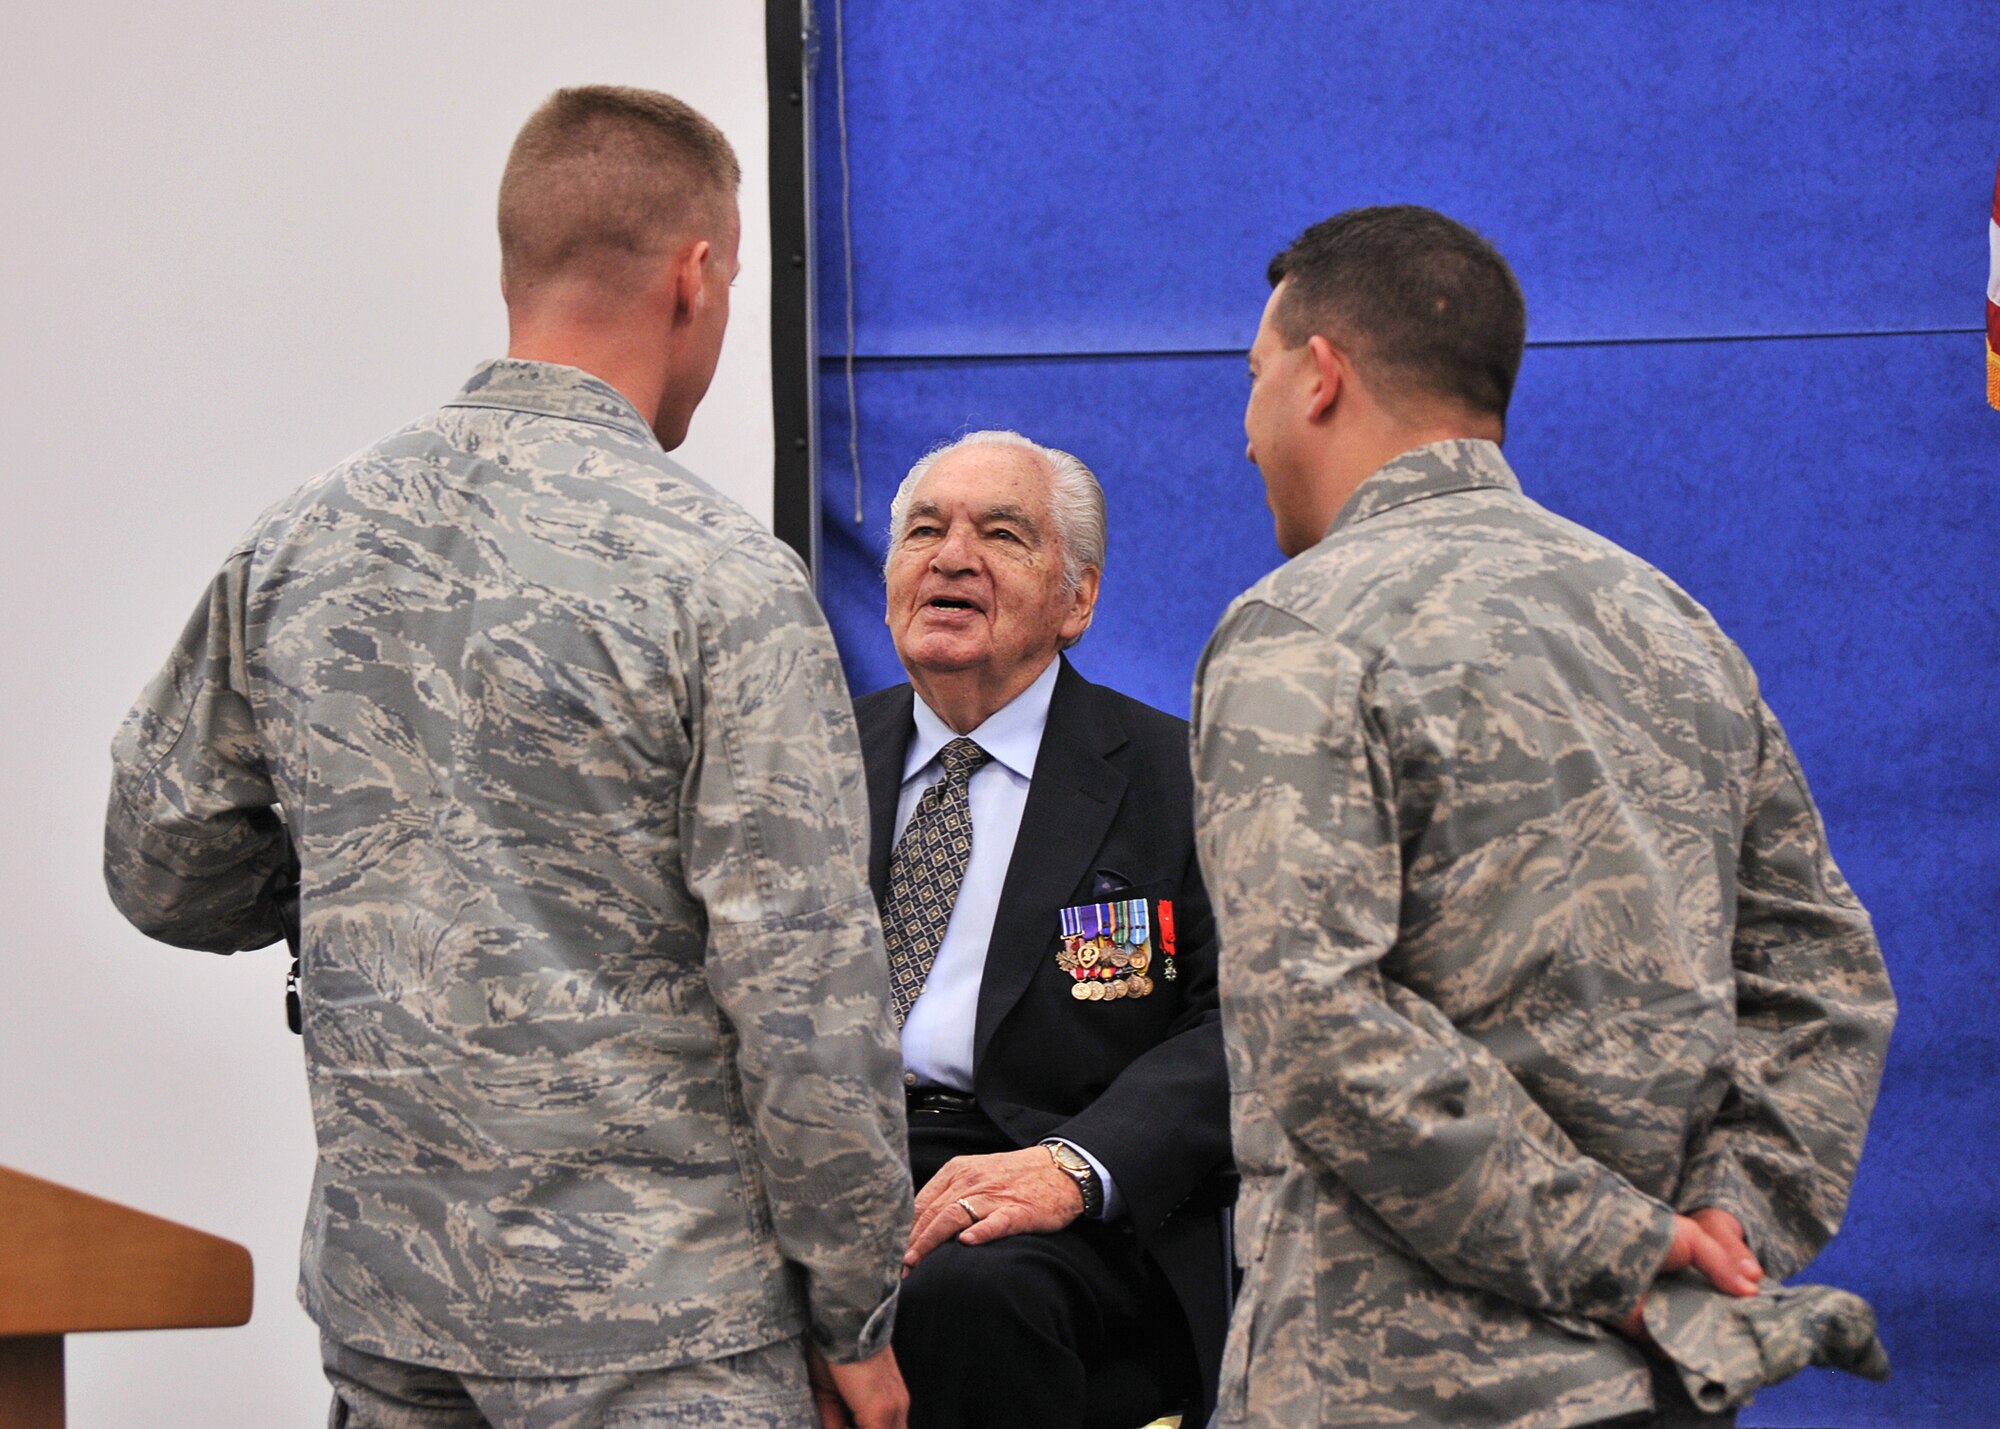 Former 303rd Bomb Group Radioman Eddie Deerfield talks with Air Force Colonels Jeffrey S. Yocum and Brian T. Kelly, Deputy Commander and Commander respectively of the 501st Combat Support wing after Deerfield’s talk at RAF Molesworth as part of the celebration of HELL’S ANGELS DAY on May 13th. (U.S. Air Force photo by Staff Sgt. Javier Cruz)